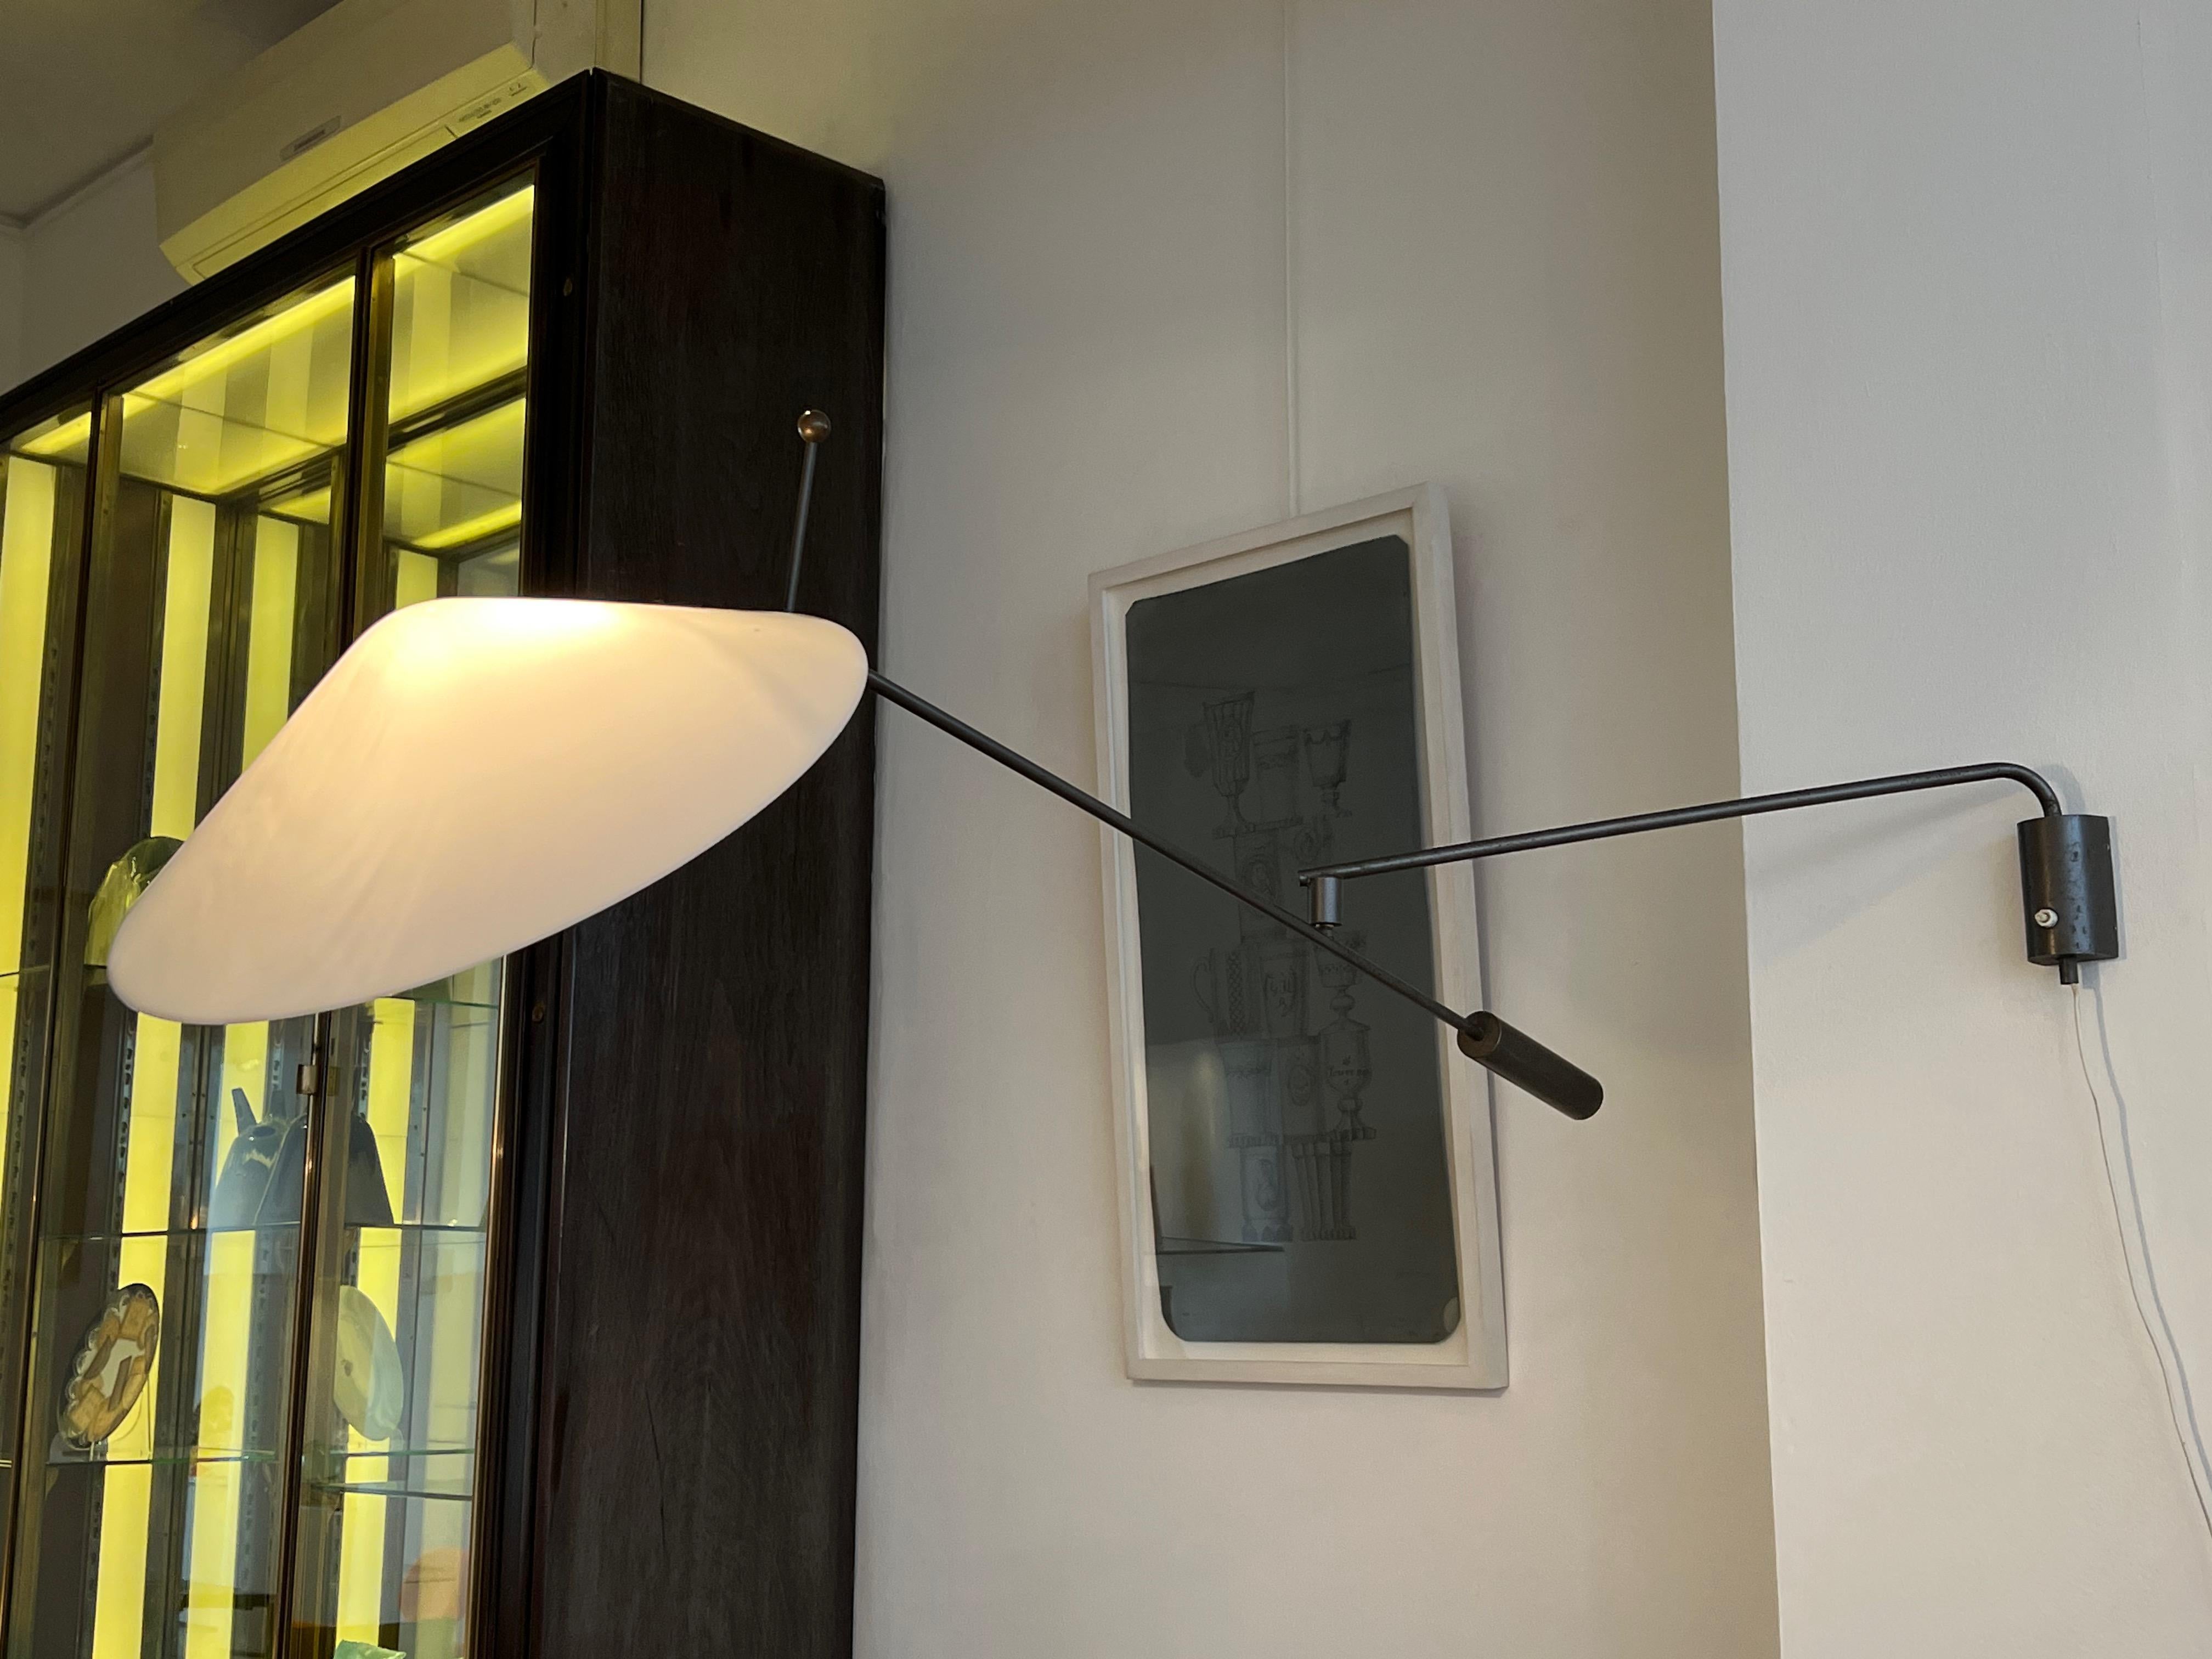 Elegant and dramatic black lacquered metal and brass wall light with perspex lampshade by renowned French post-war lighting designer, Robert Mathieu. His training at the prestigious Ecole Boulle and experience as a watchmaker inform the precision